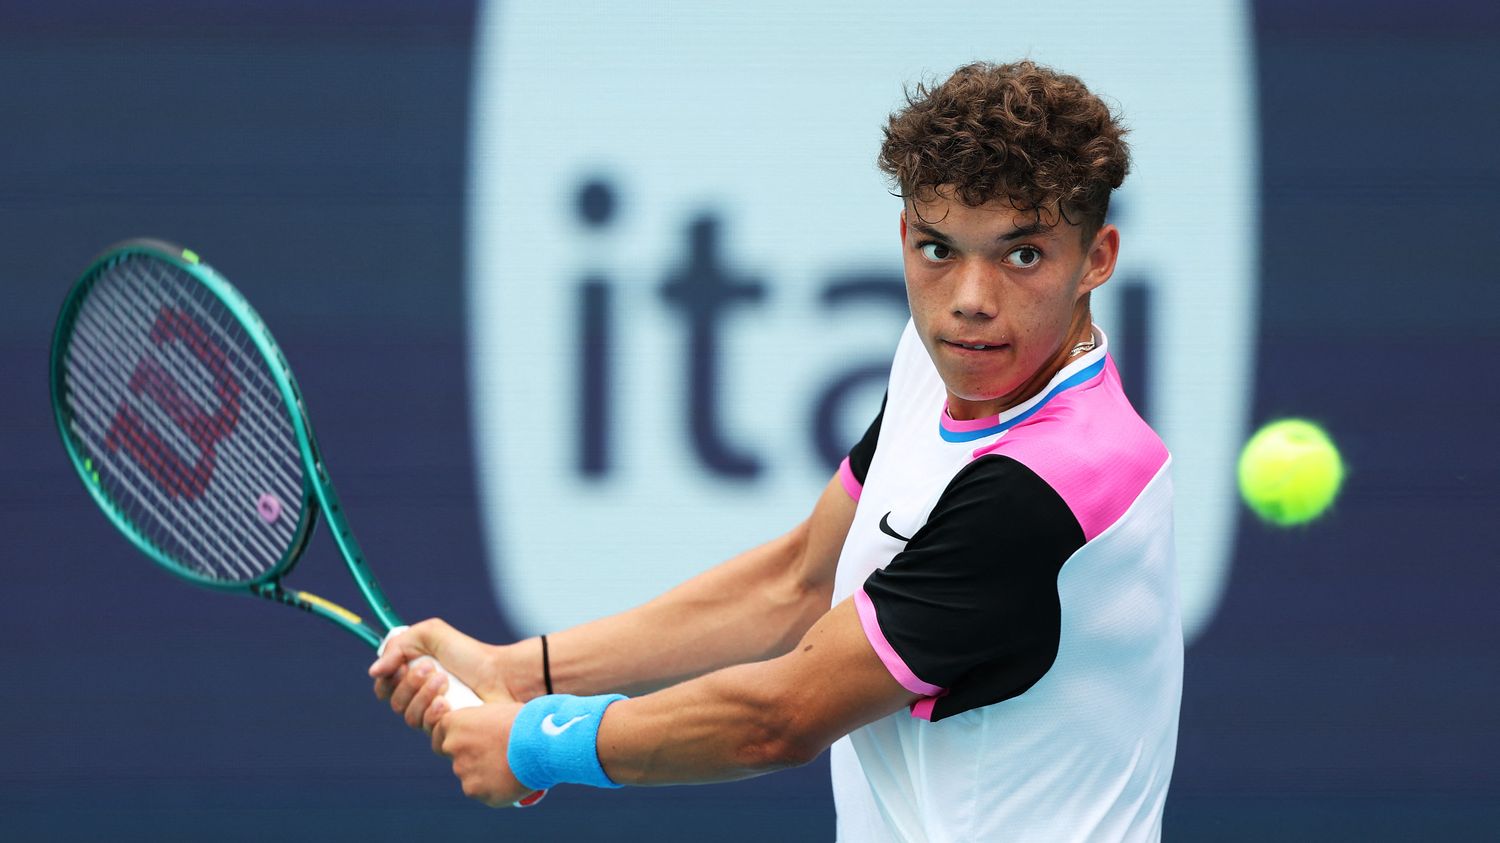 Tennis: Darwin Blanch, this young 16-year-old American who is challenging Rafael Nadal in Madrid